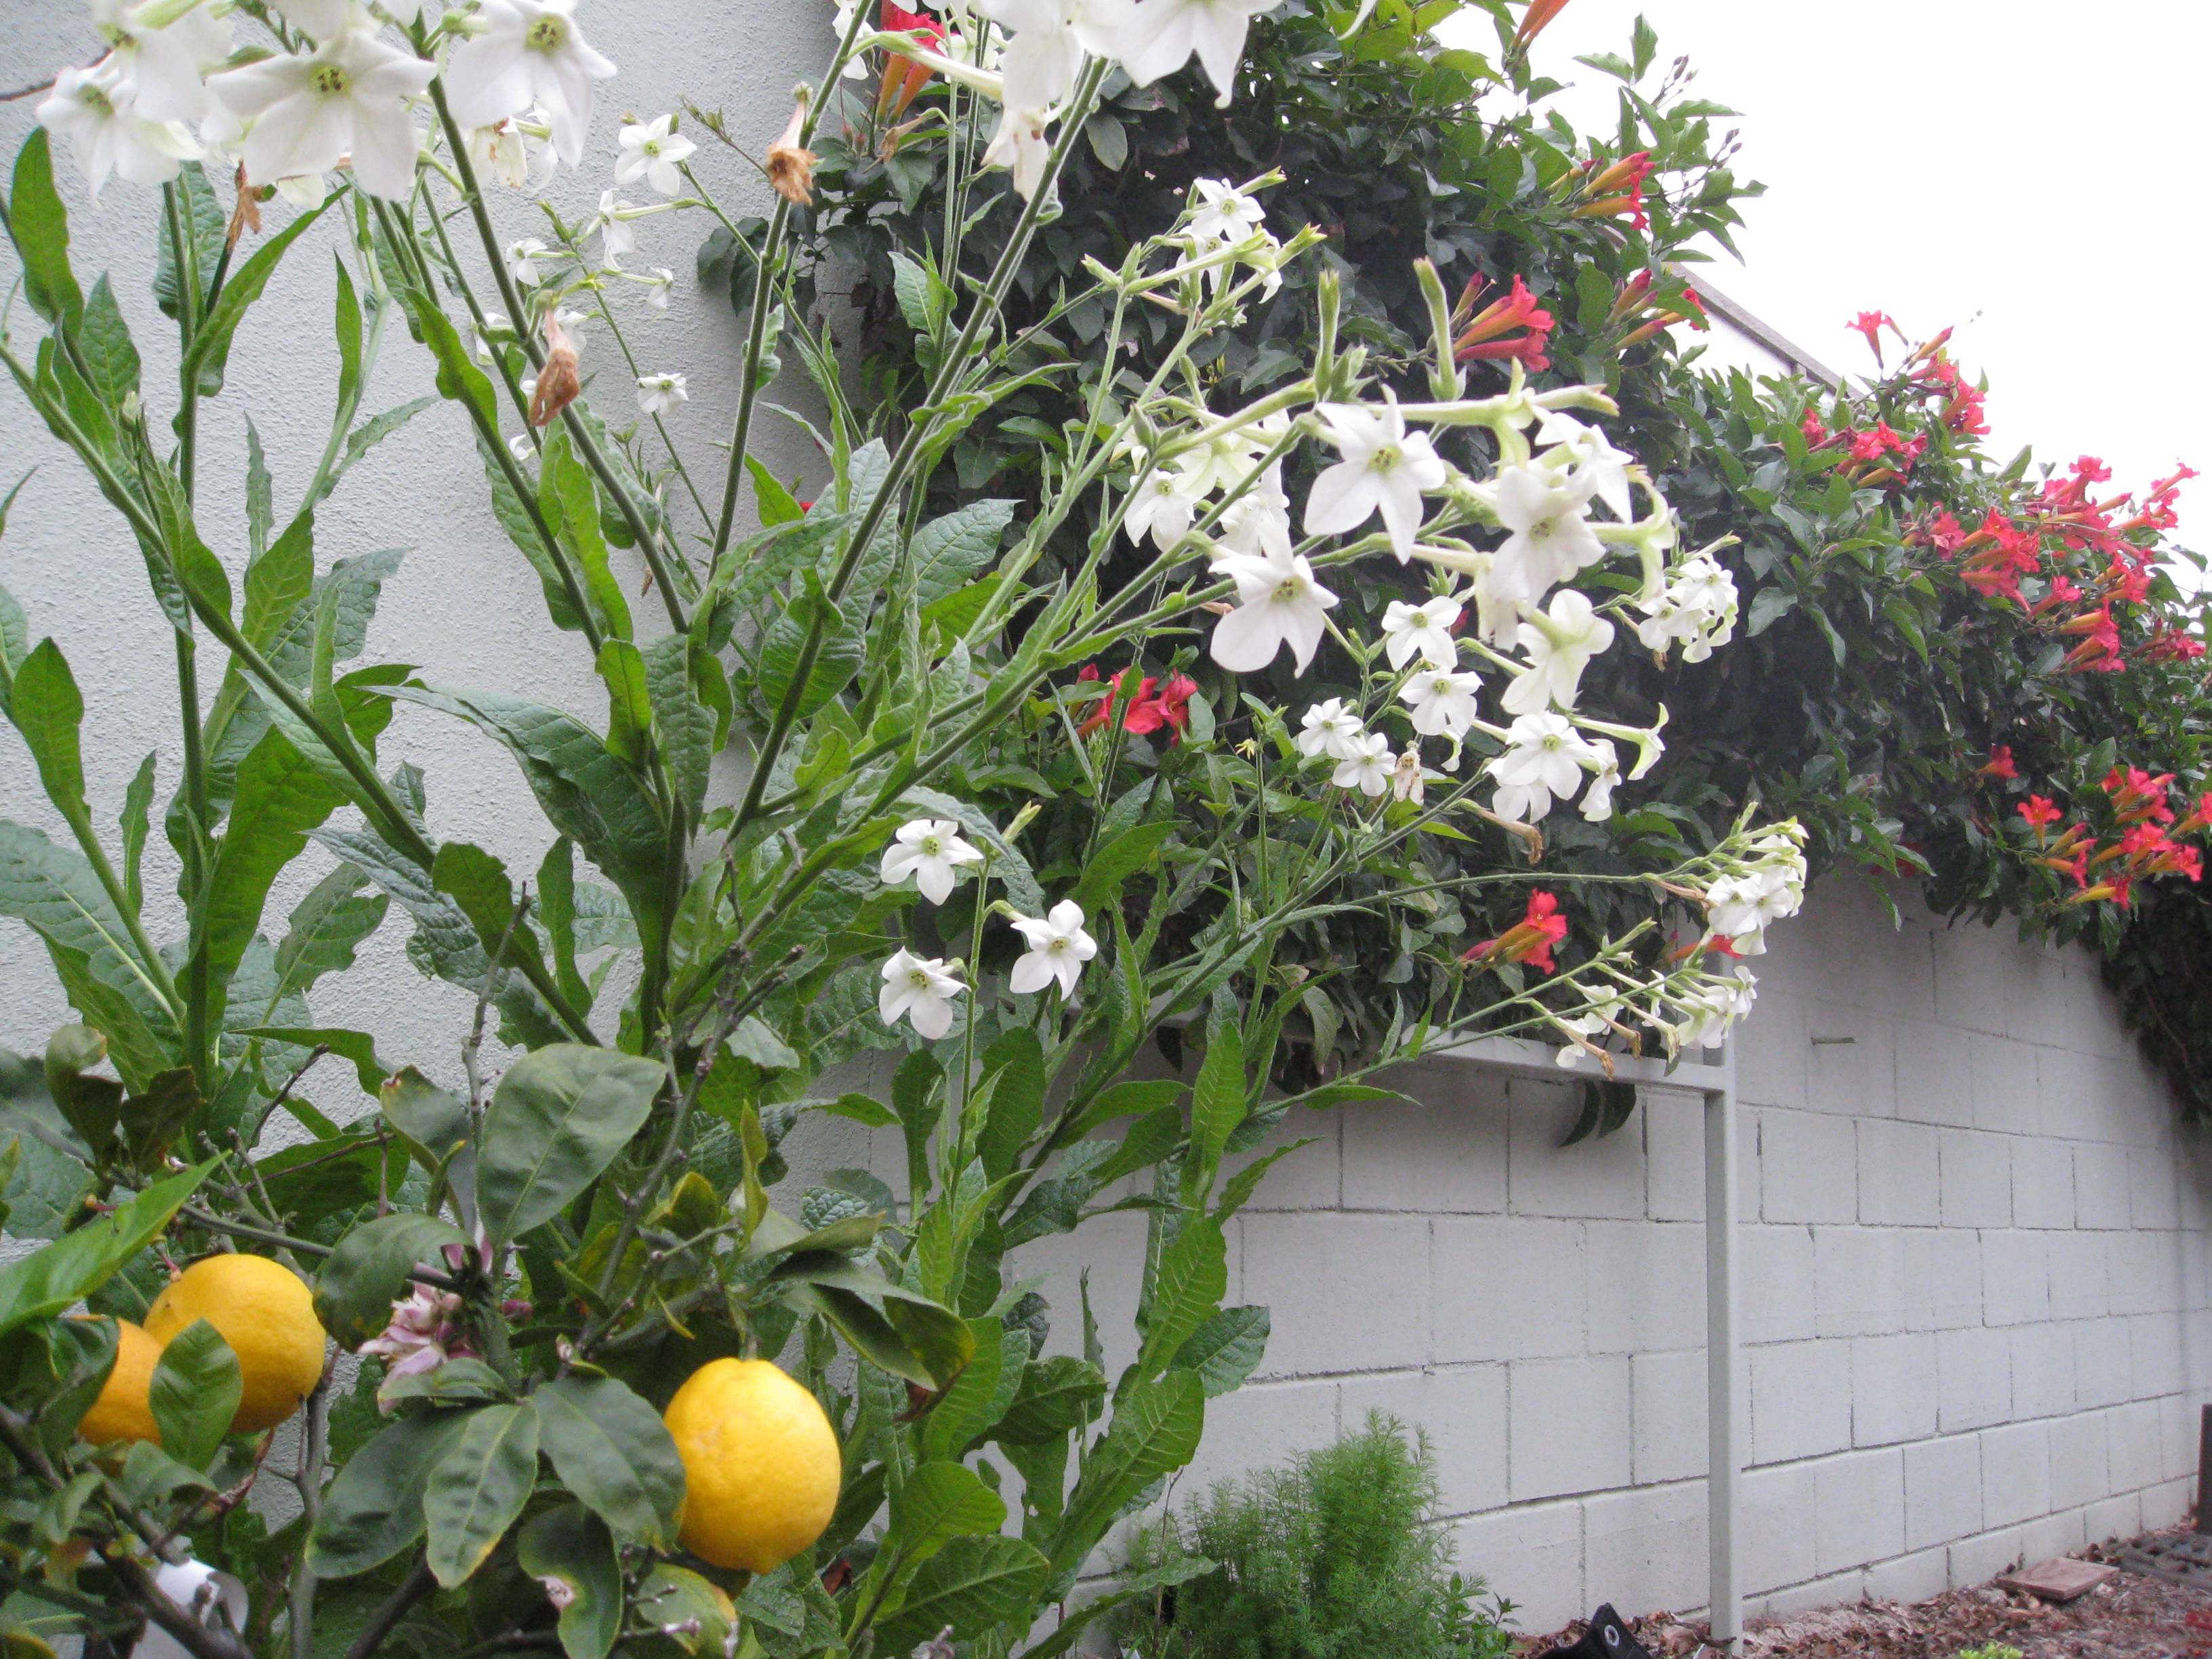 A container lemon tree props up nicotiana with a background of trumpet vine.